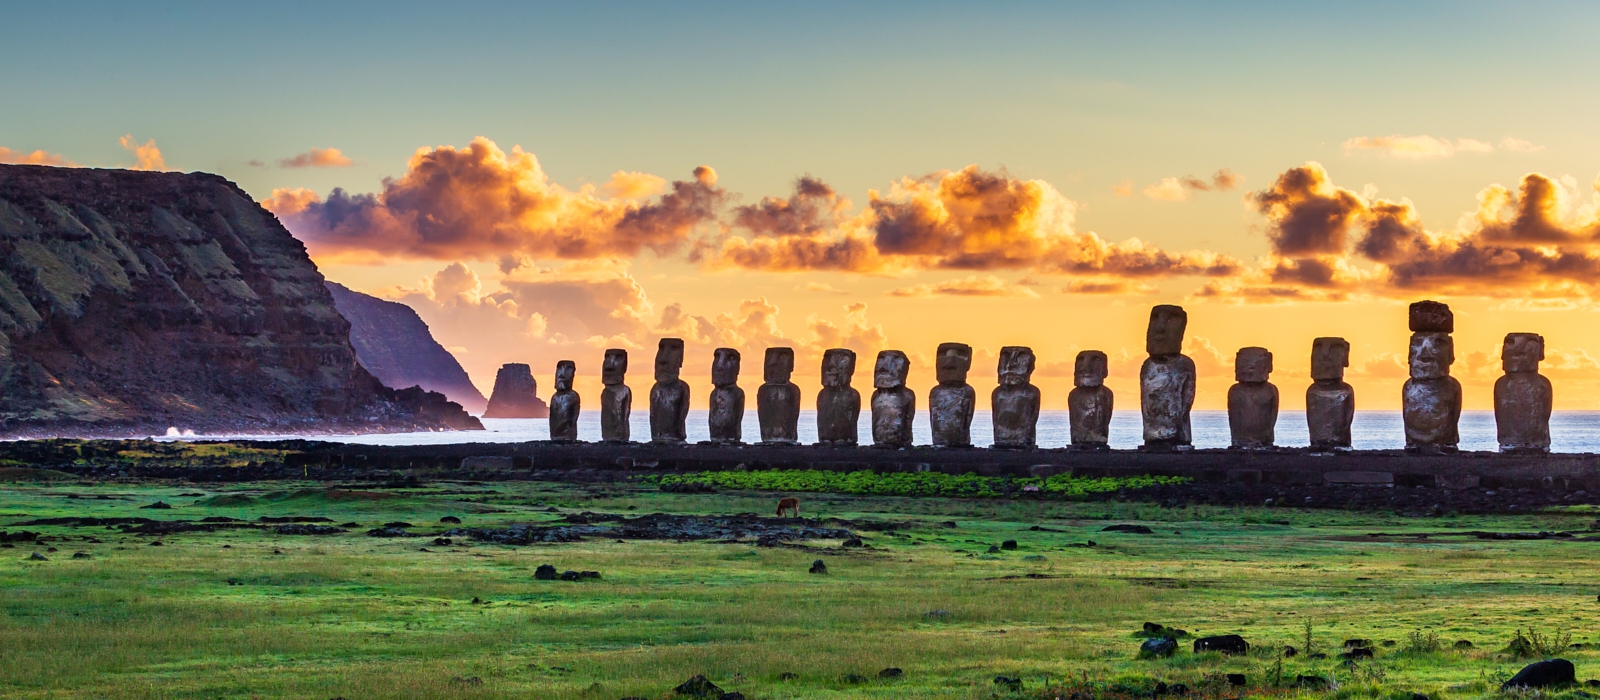 CLASSIC CHILE AND EASTER ISLAND